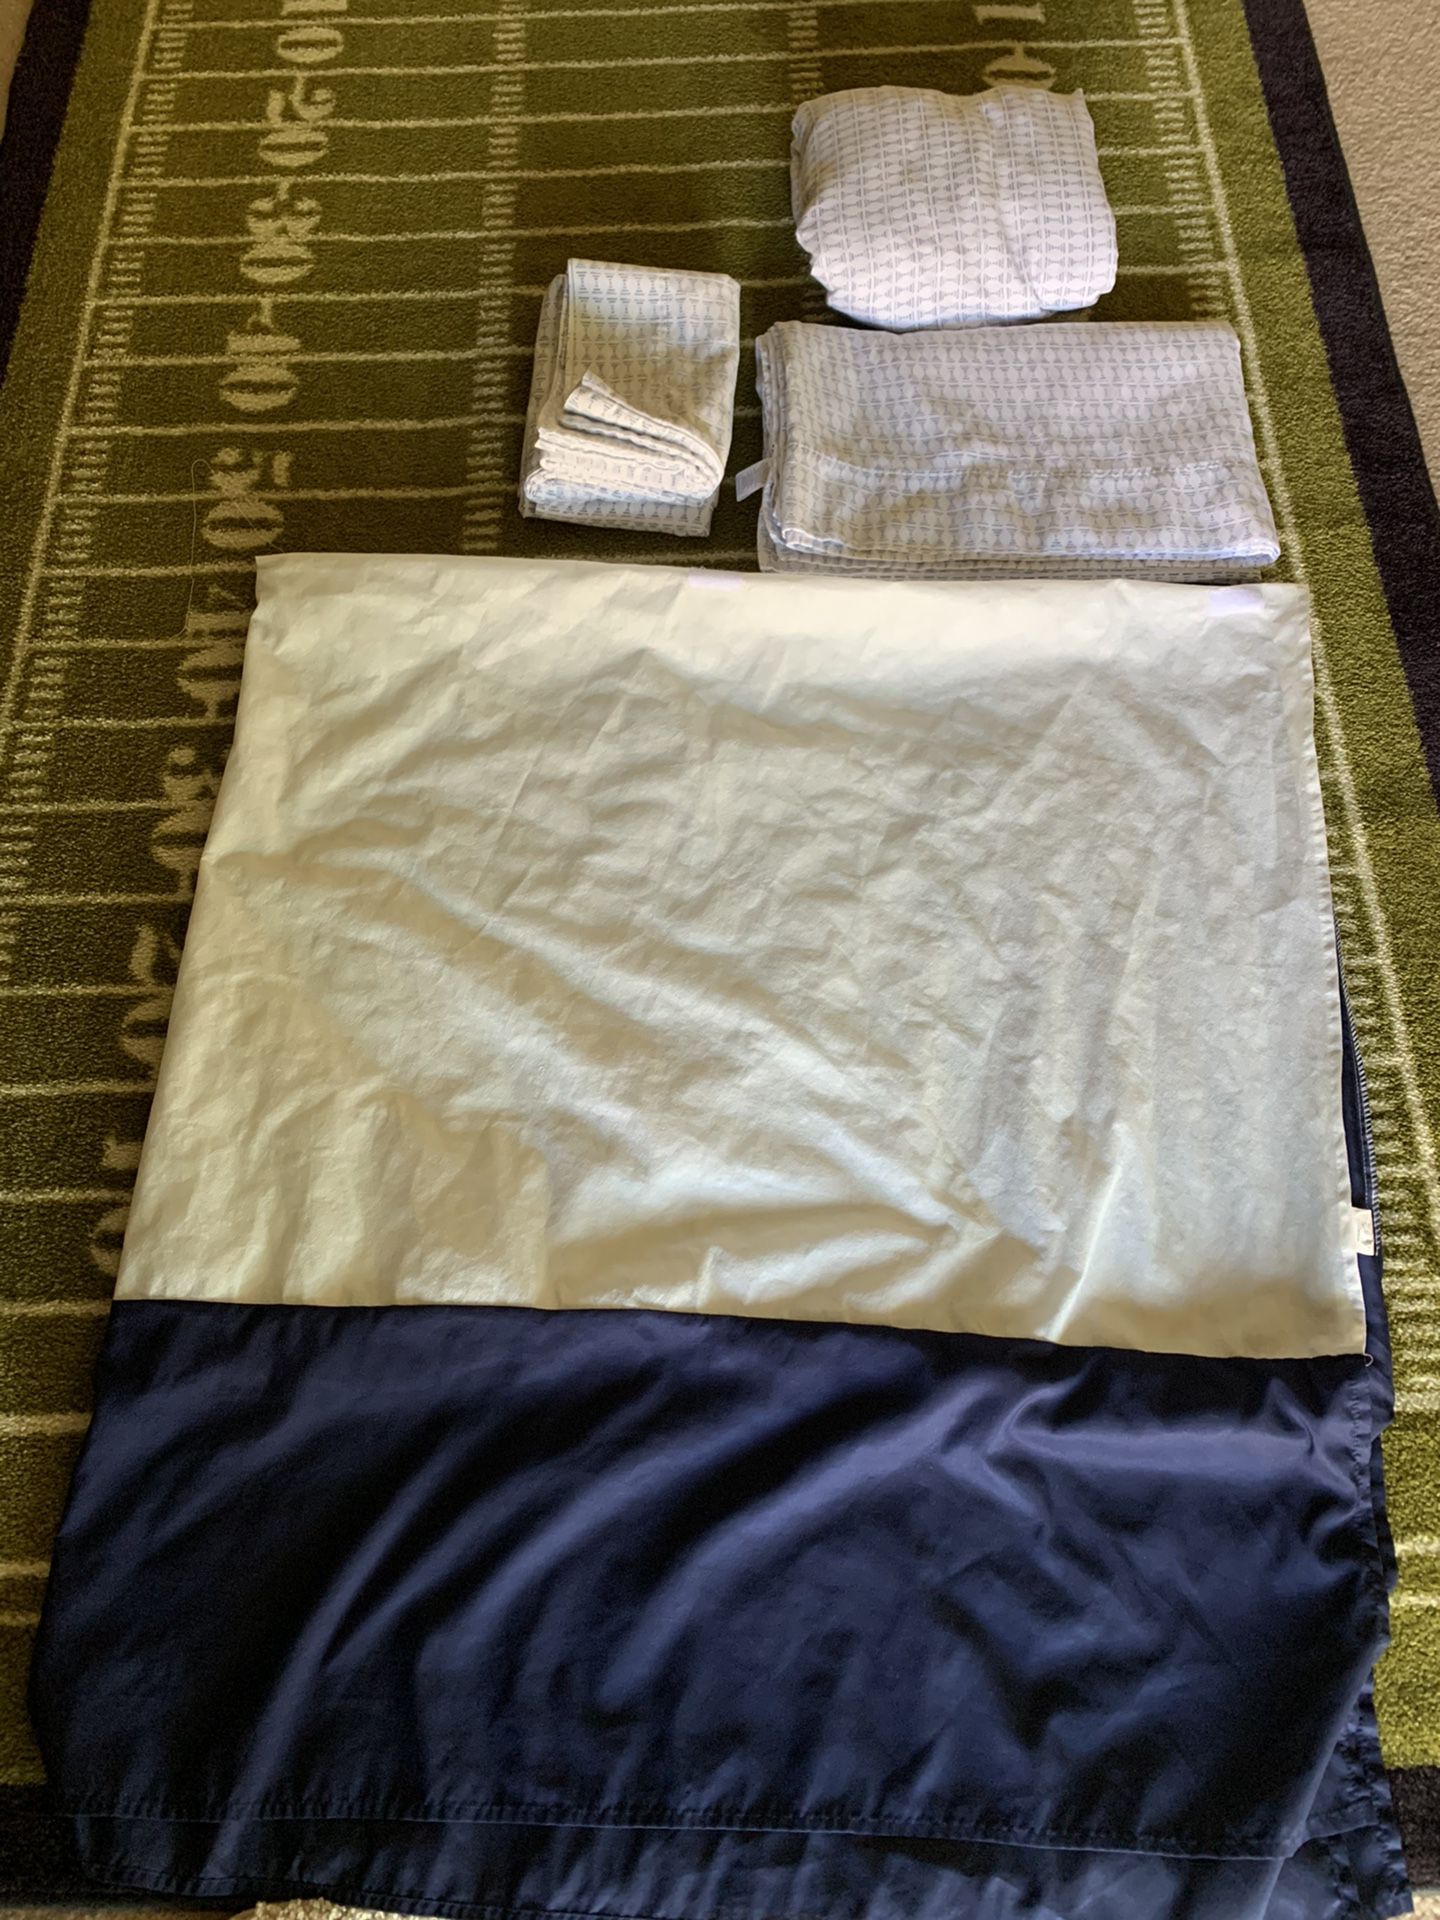 Full Size Bed Sheets. Includes: Flat Sheet, Fitted Sheet, Bed Skirt, 4 Pillow Cases. Color Navy Blue And White. $ 10